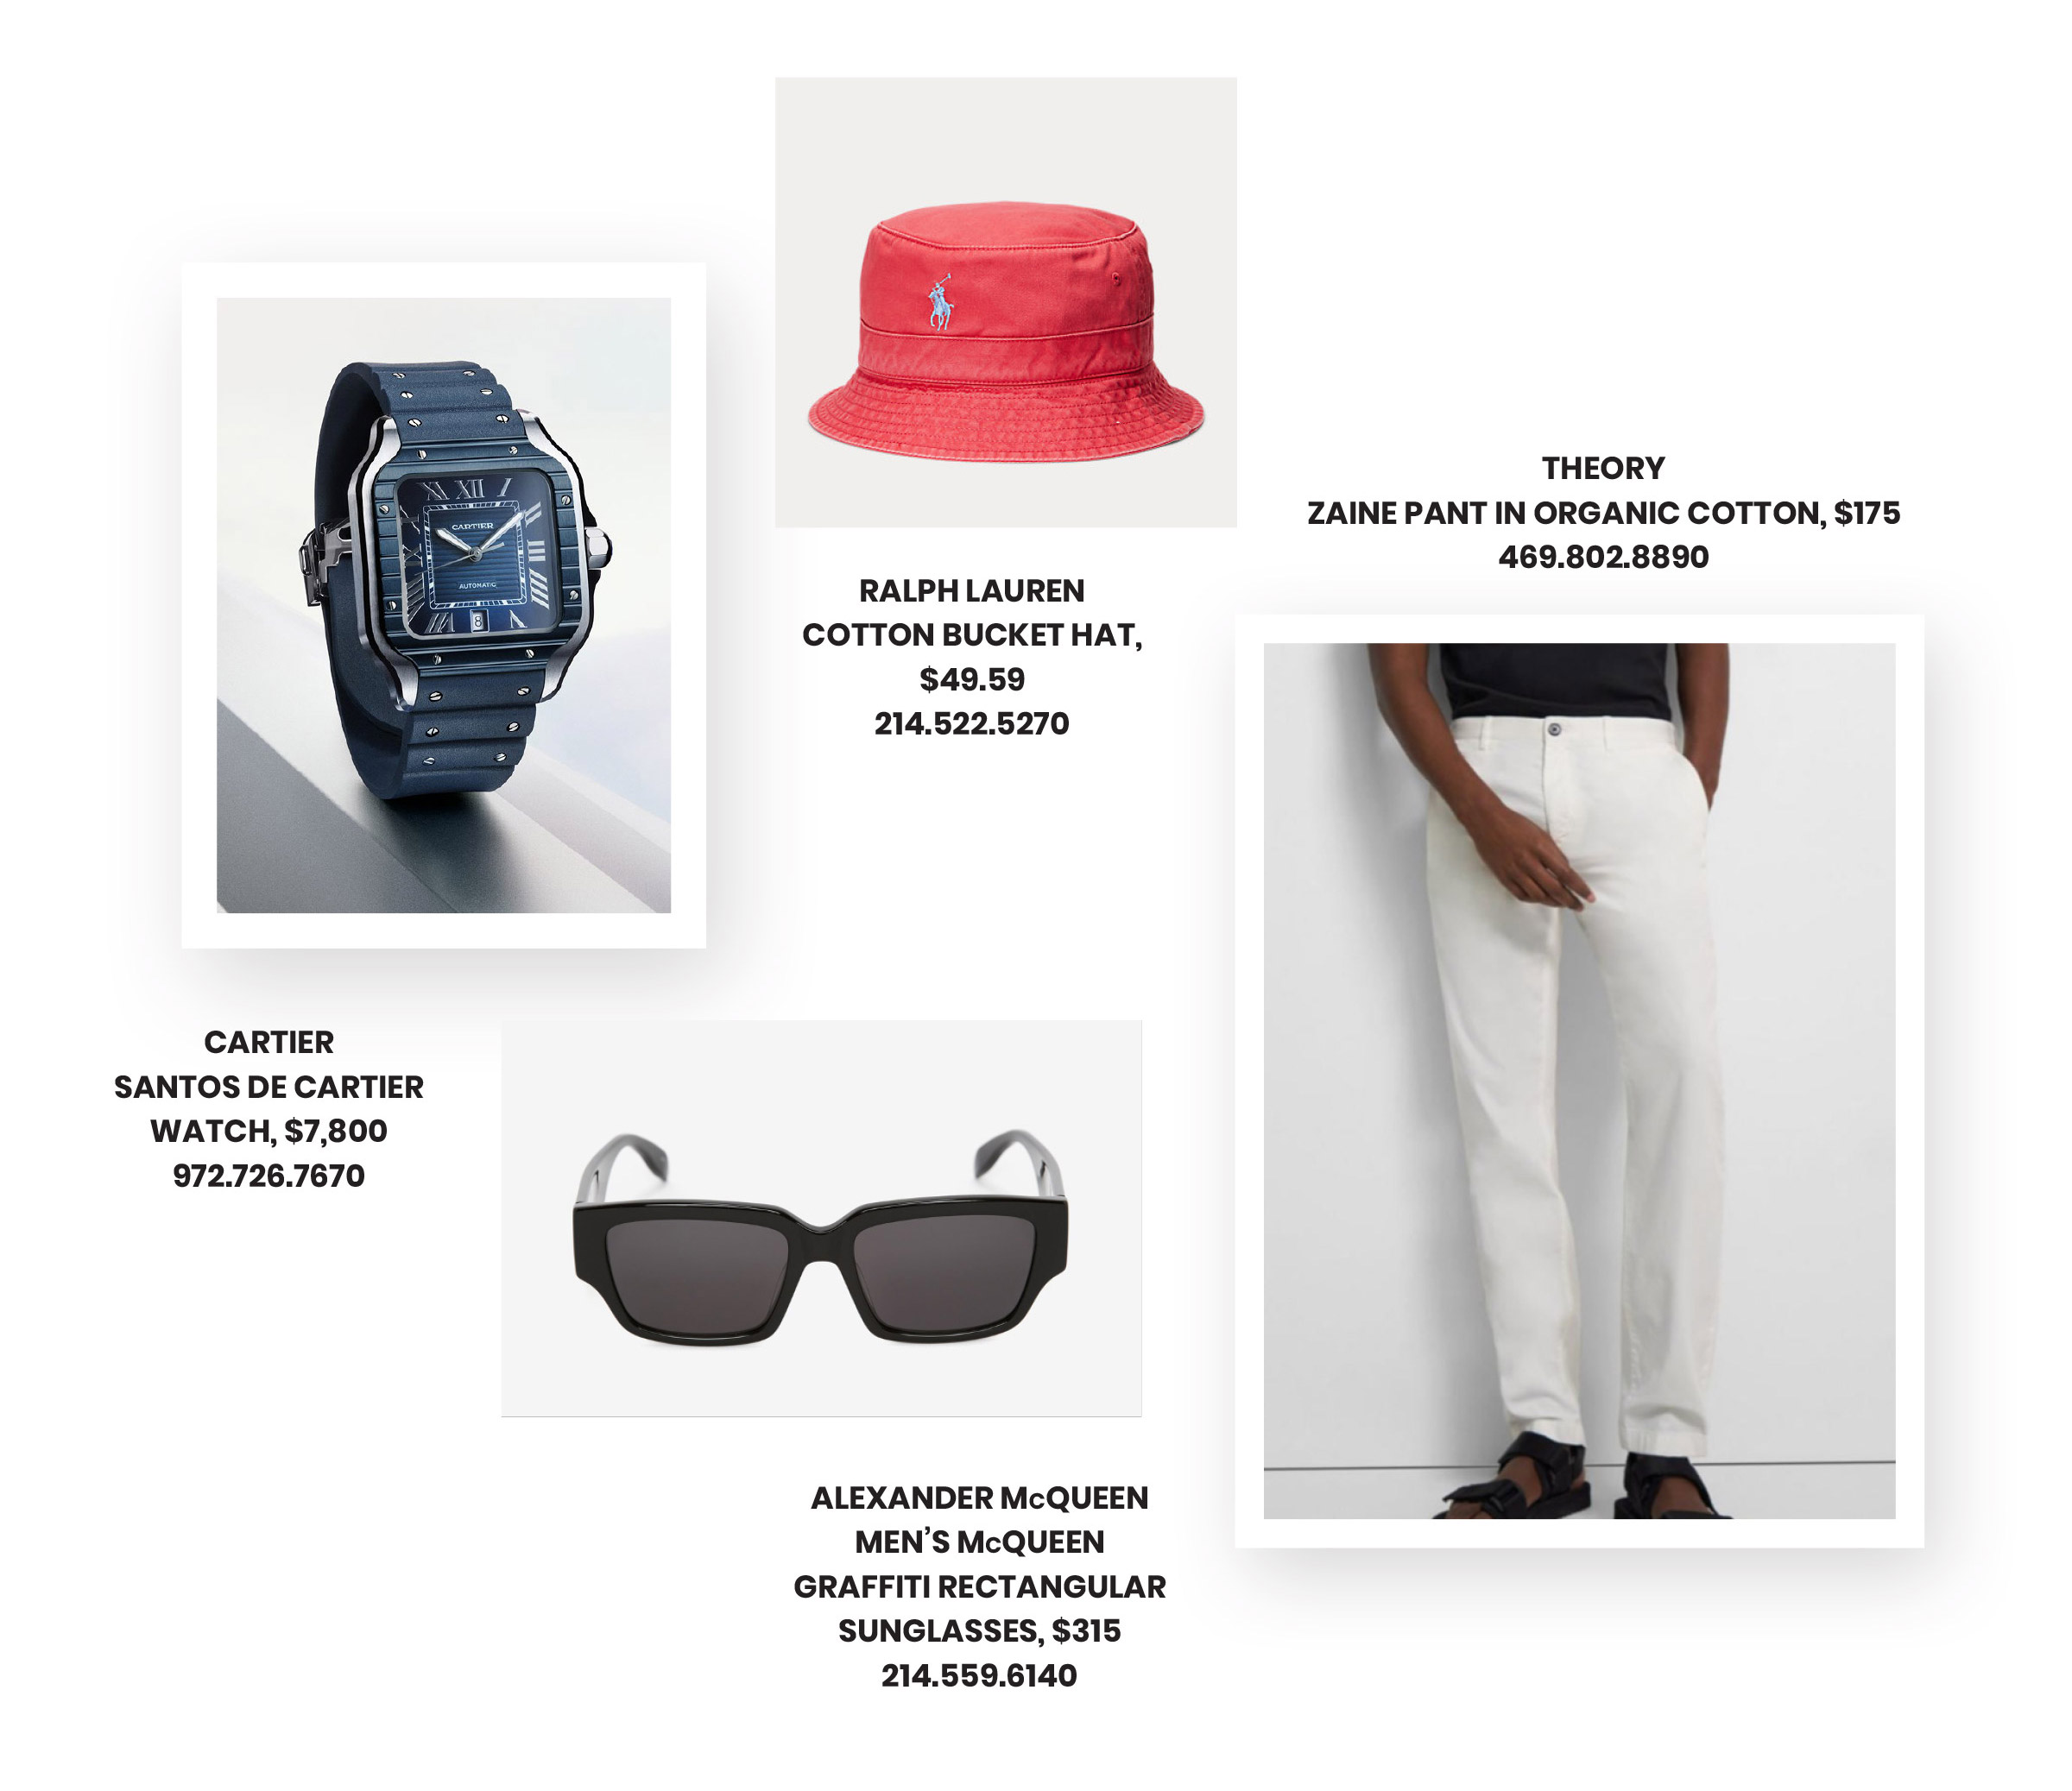 Father’s Day Gifts featuring Cartier watch, Ralph Lauren bucket hat, and Theory Zaine pants